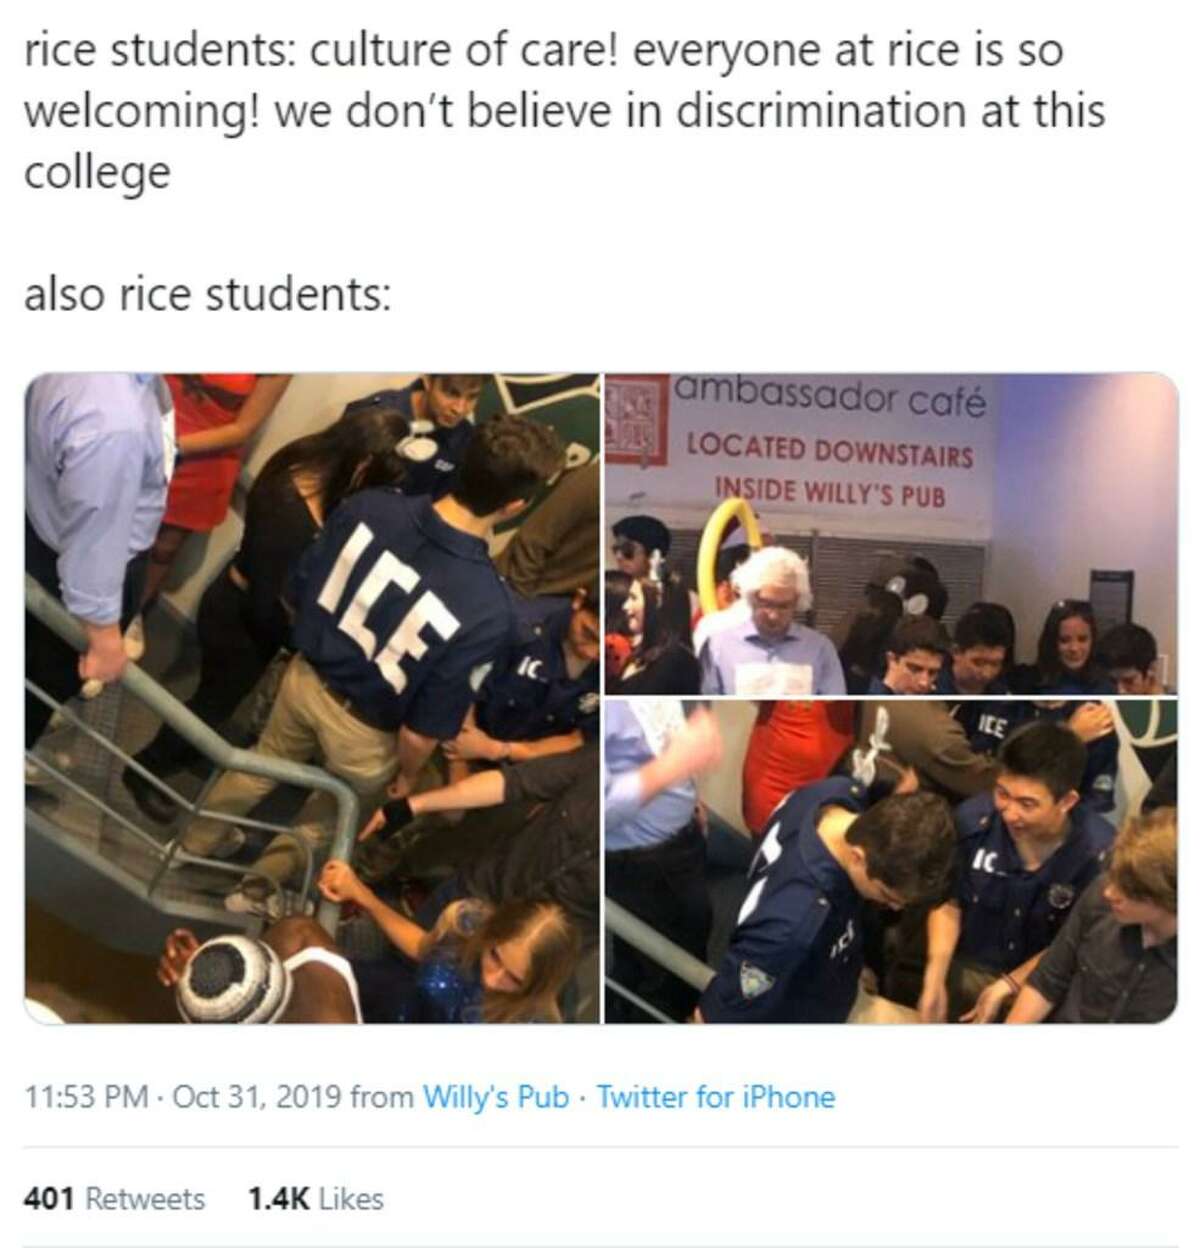 Three Rice University students who dressed up as U.S. Immigration and Customs Enforcement officers at a Halloween event on campus have sparked outrage at the university after their photos surfaced on social media.